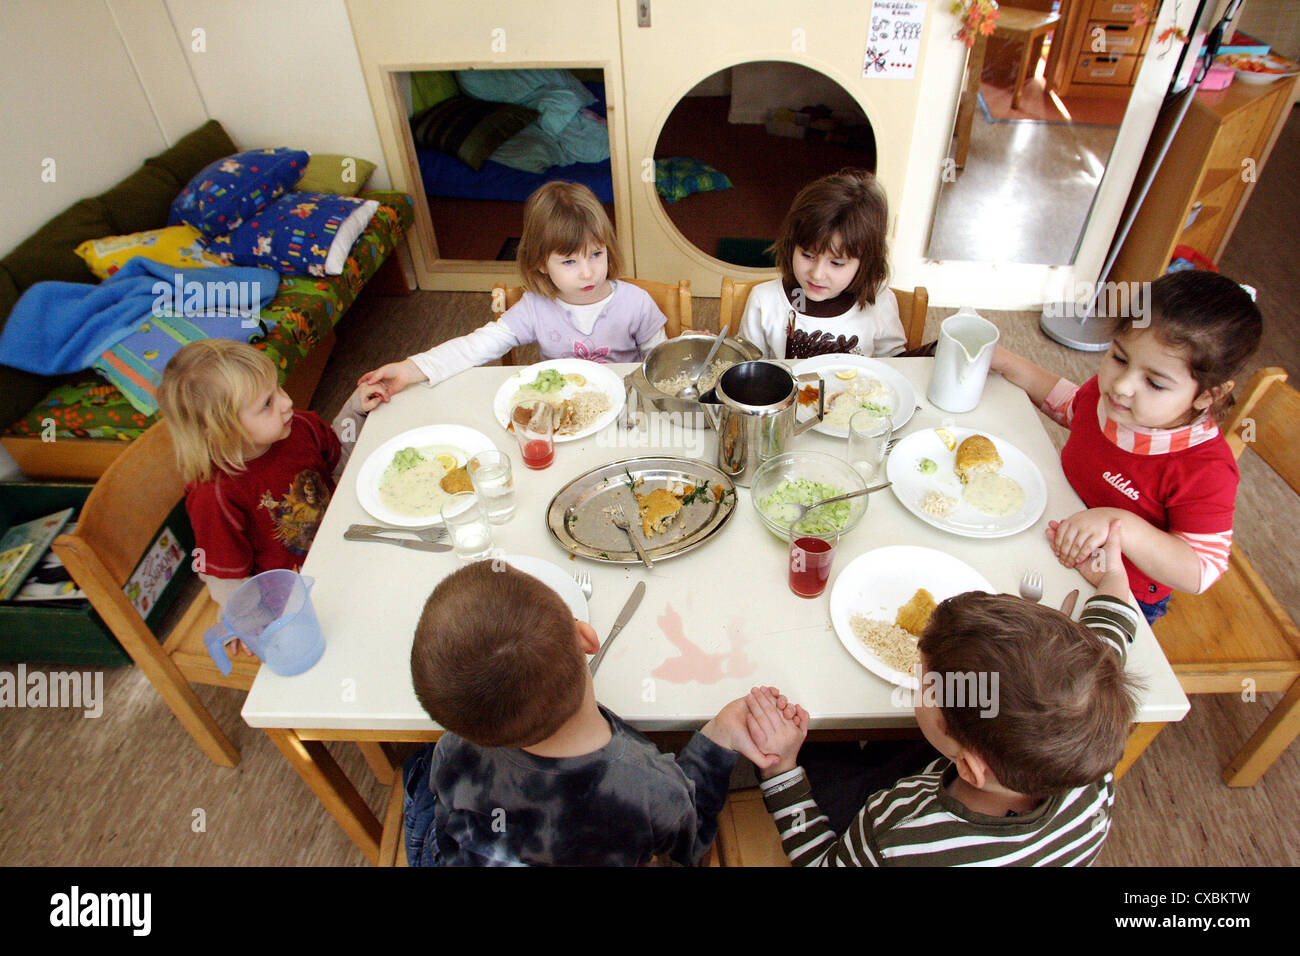 Berlin, children sit together at the table and eat lunch Stock Photo